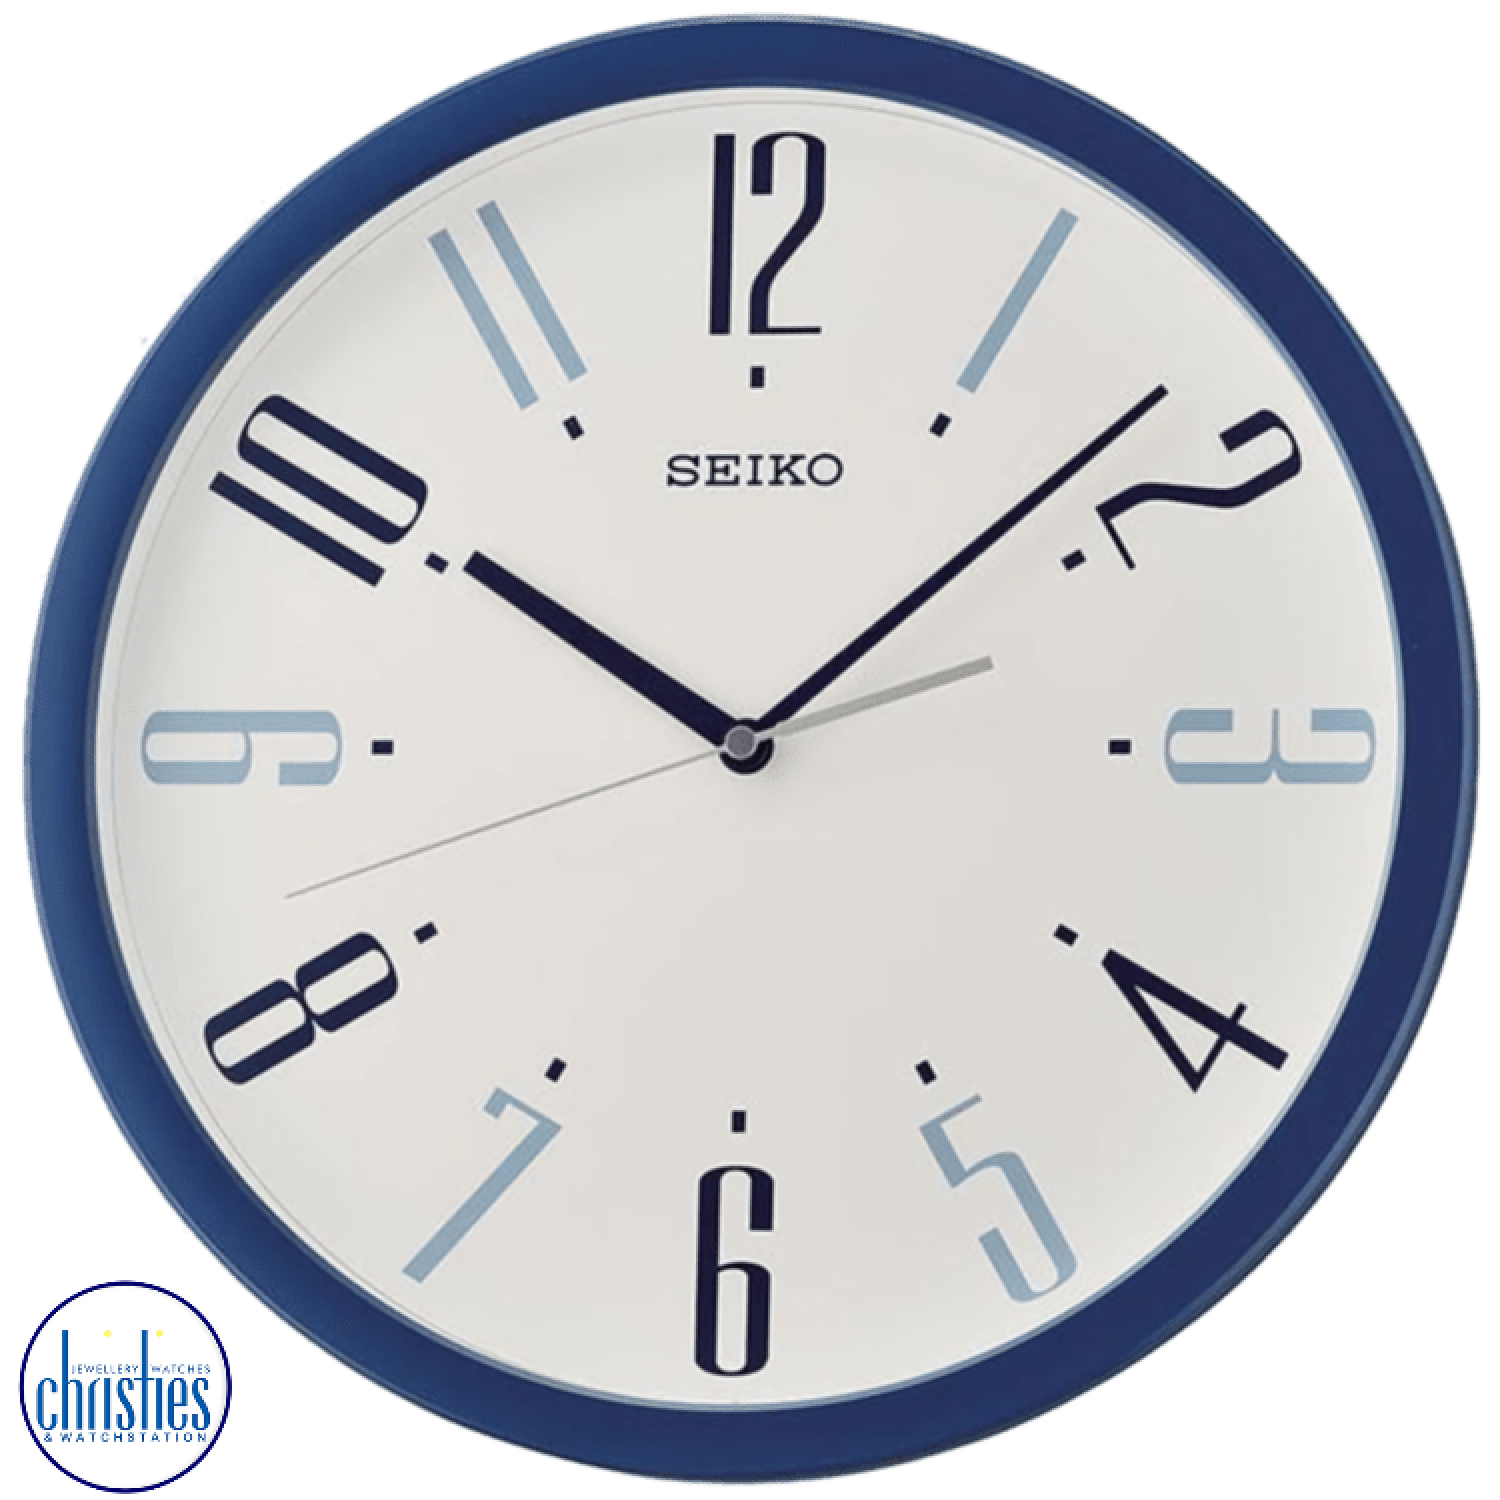 QXA729L Seiko Blue Analog Wall Clock. The Seiko Blue Analog Wall Clock QXA729L is a modern timepiece designed to add style and functionality to your living space.